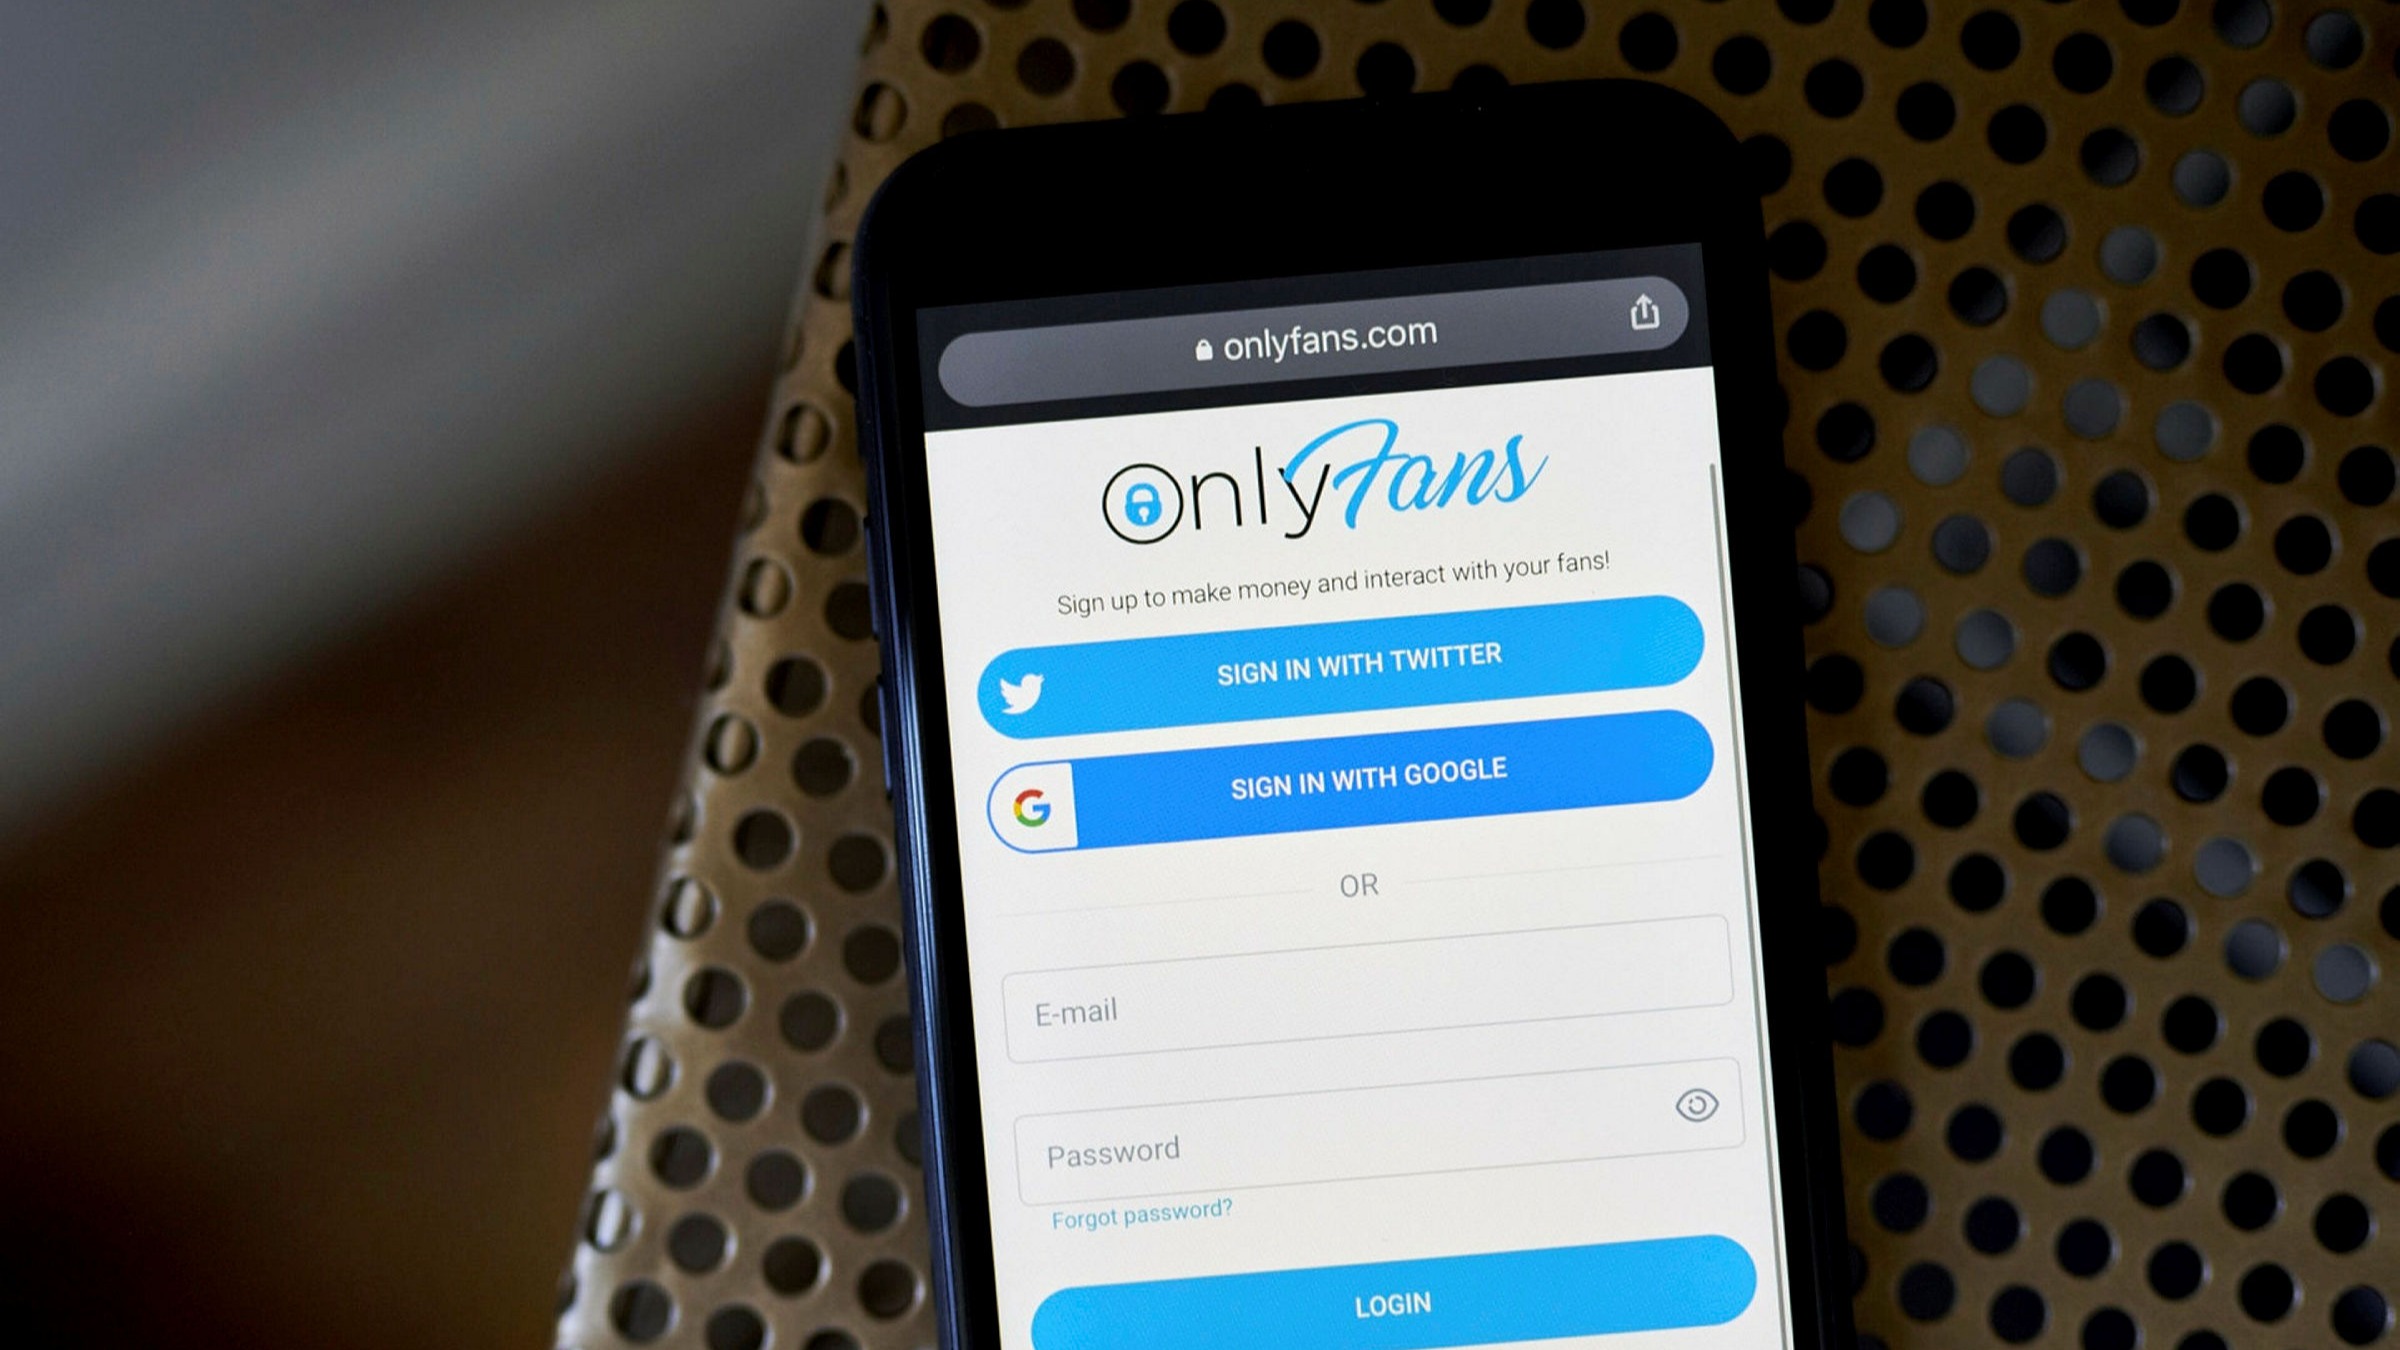 How to recover my onlyfans account